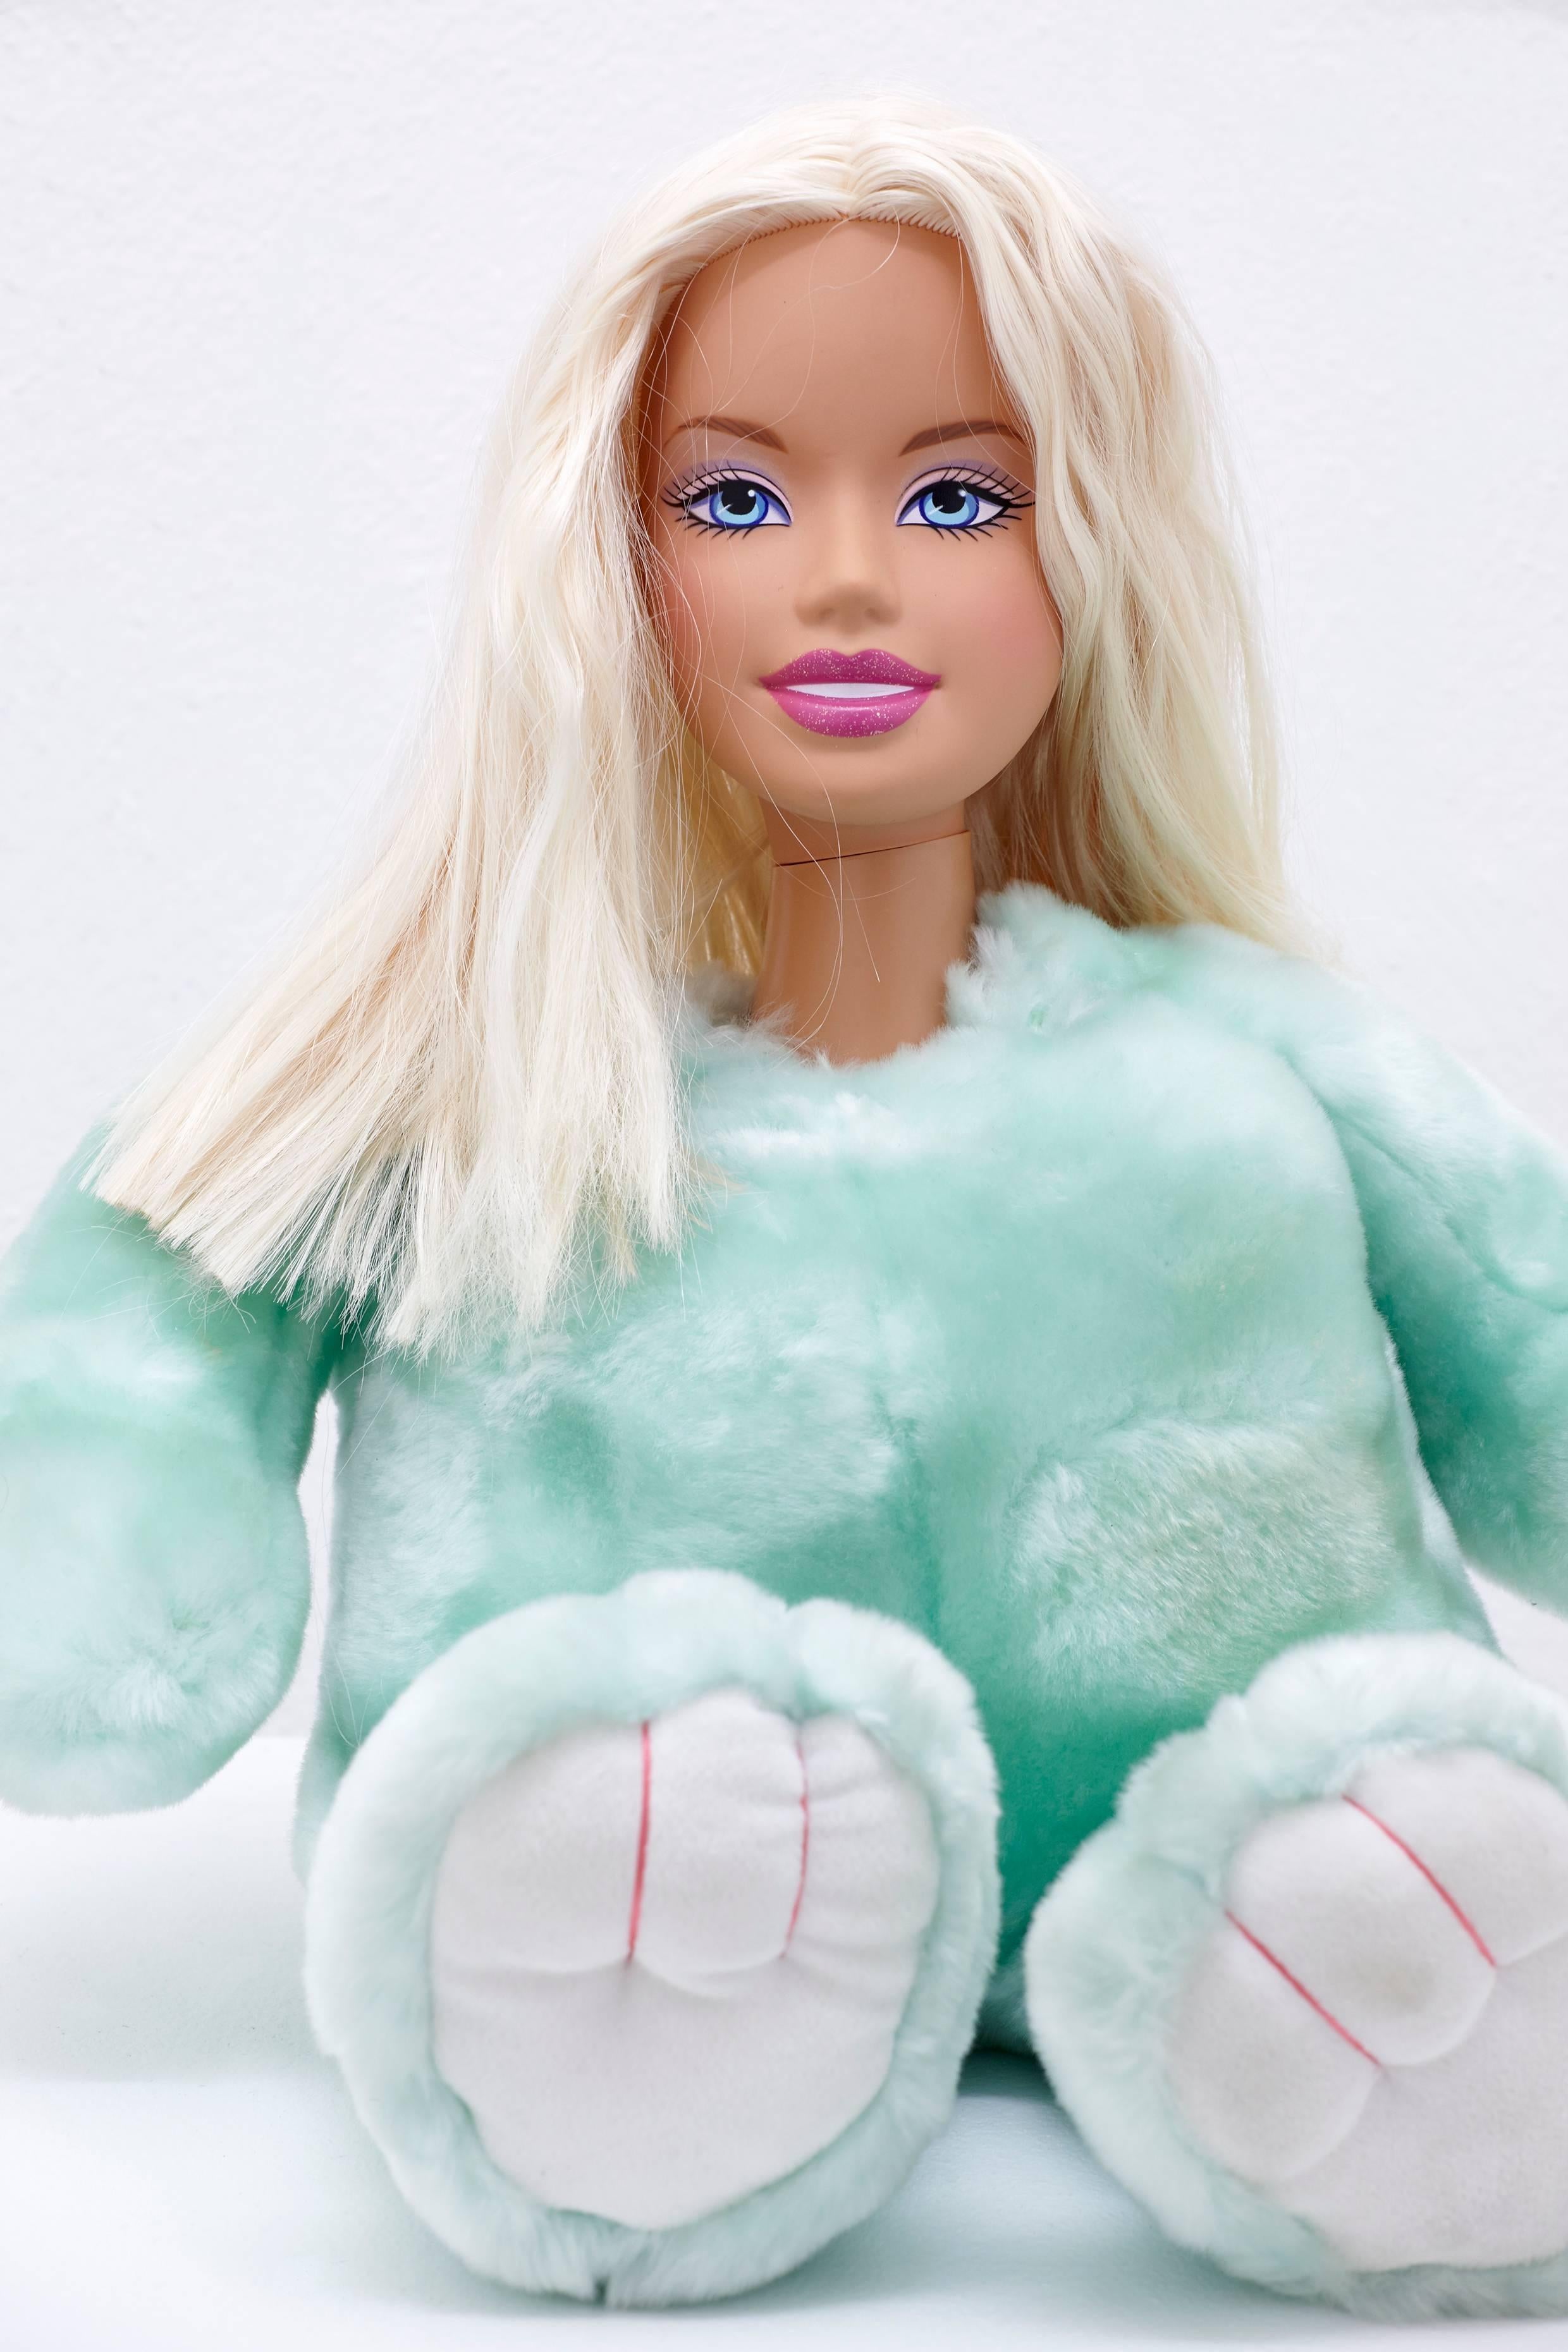 BARBIE - Sculpture by Fred Fleisher